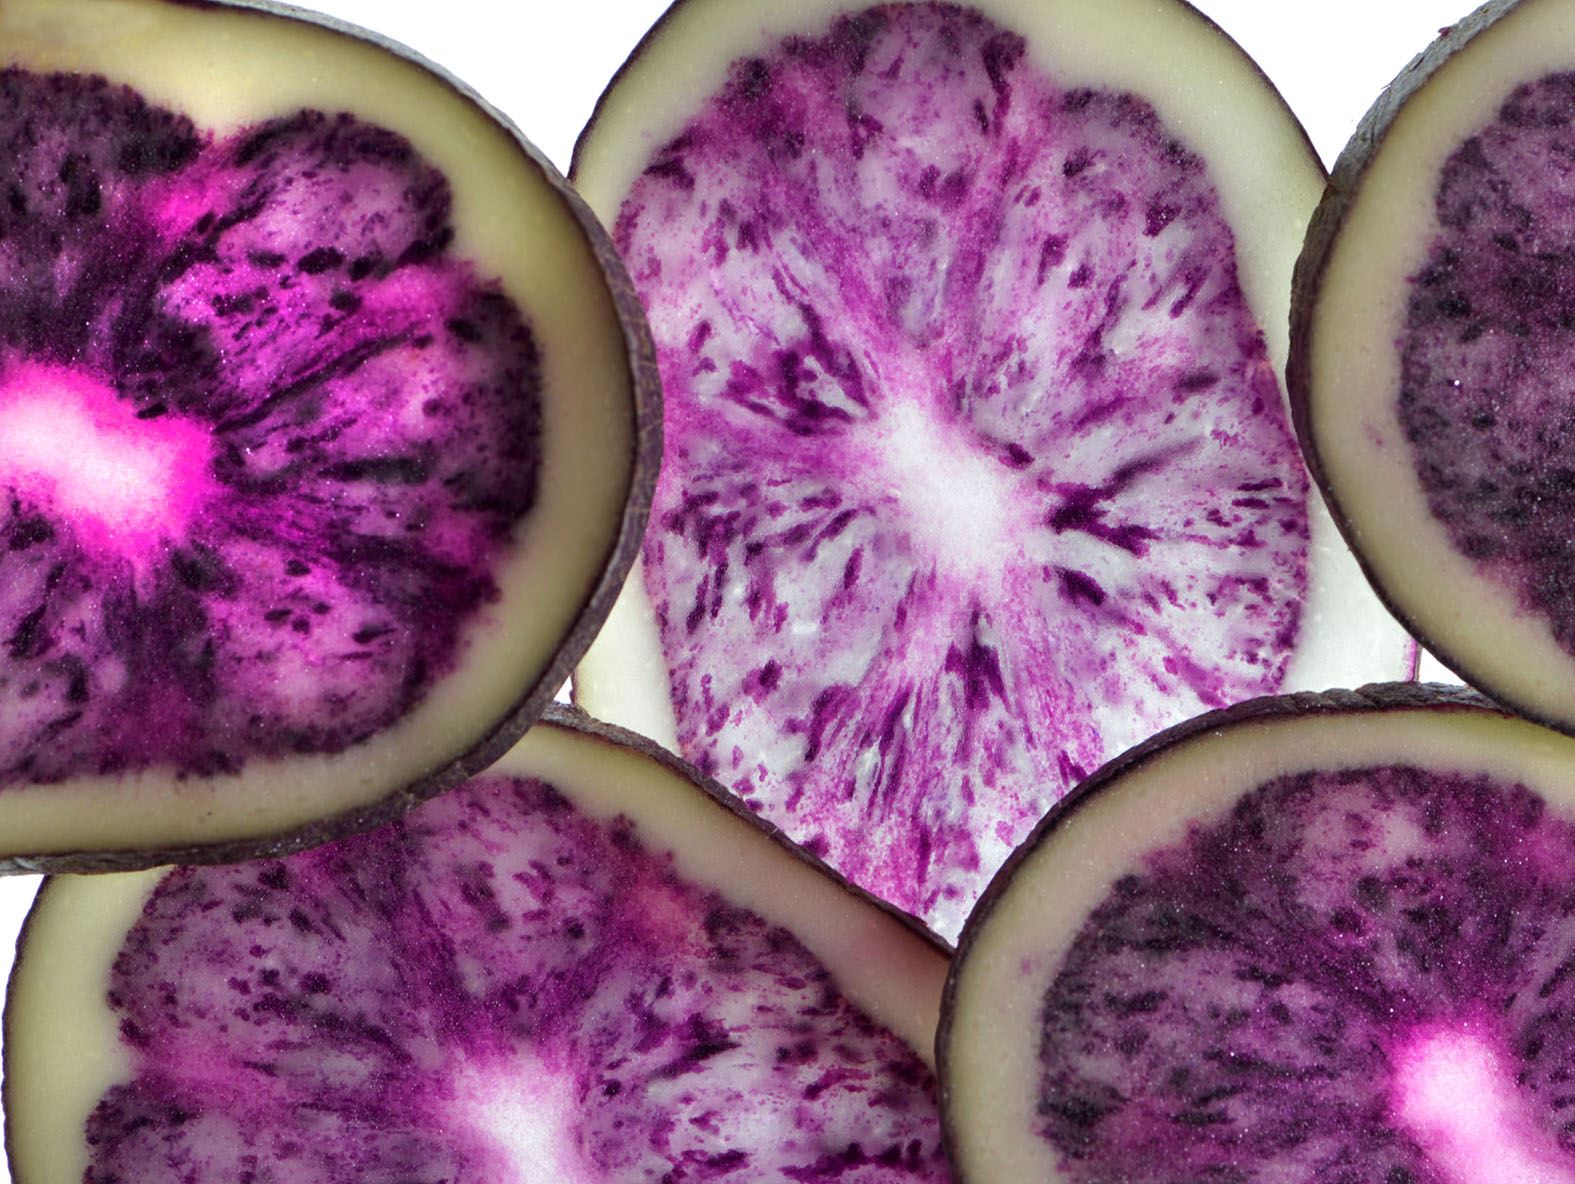 What is a Purple Potato & Why Are They Purple? - The Produce Nerd